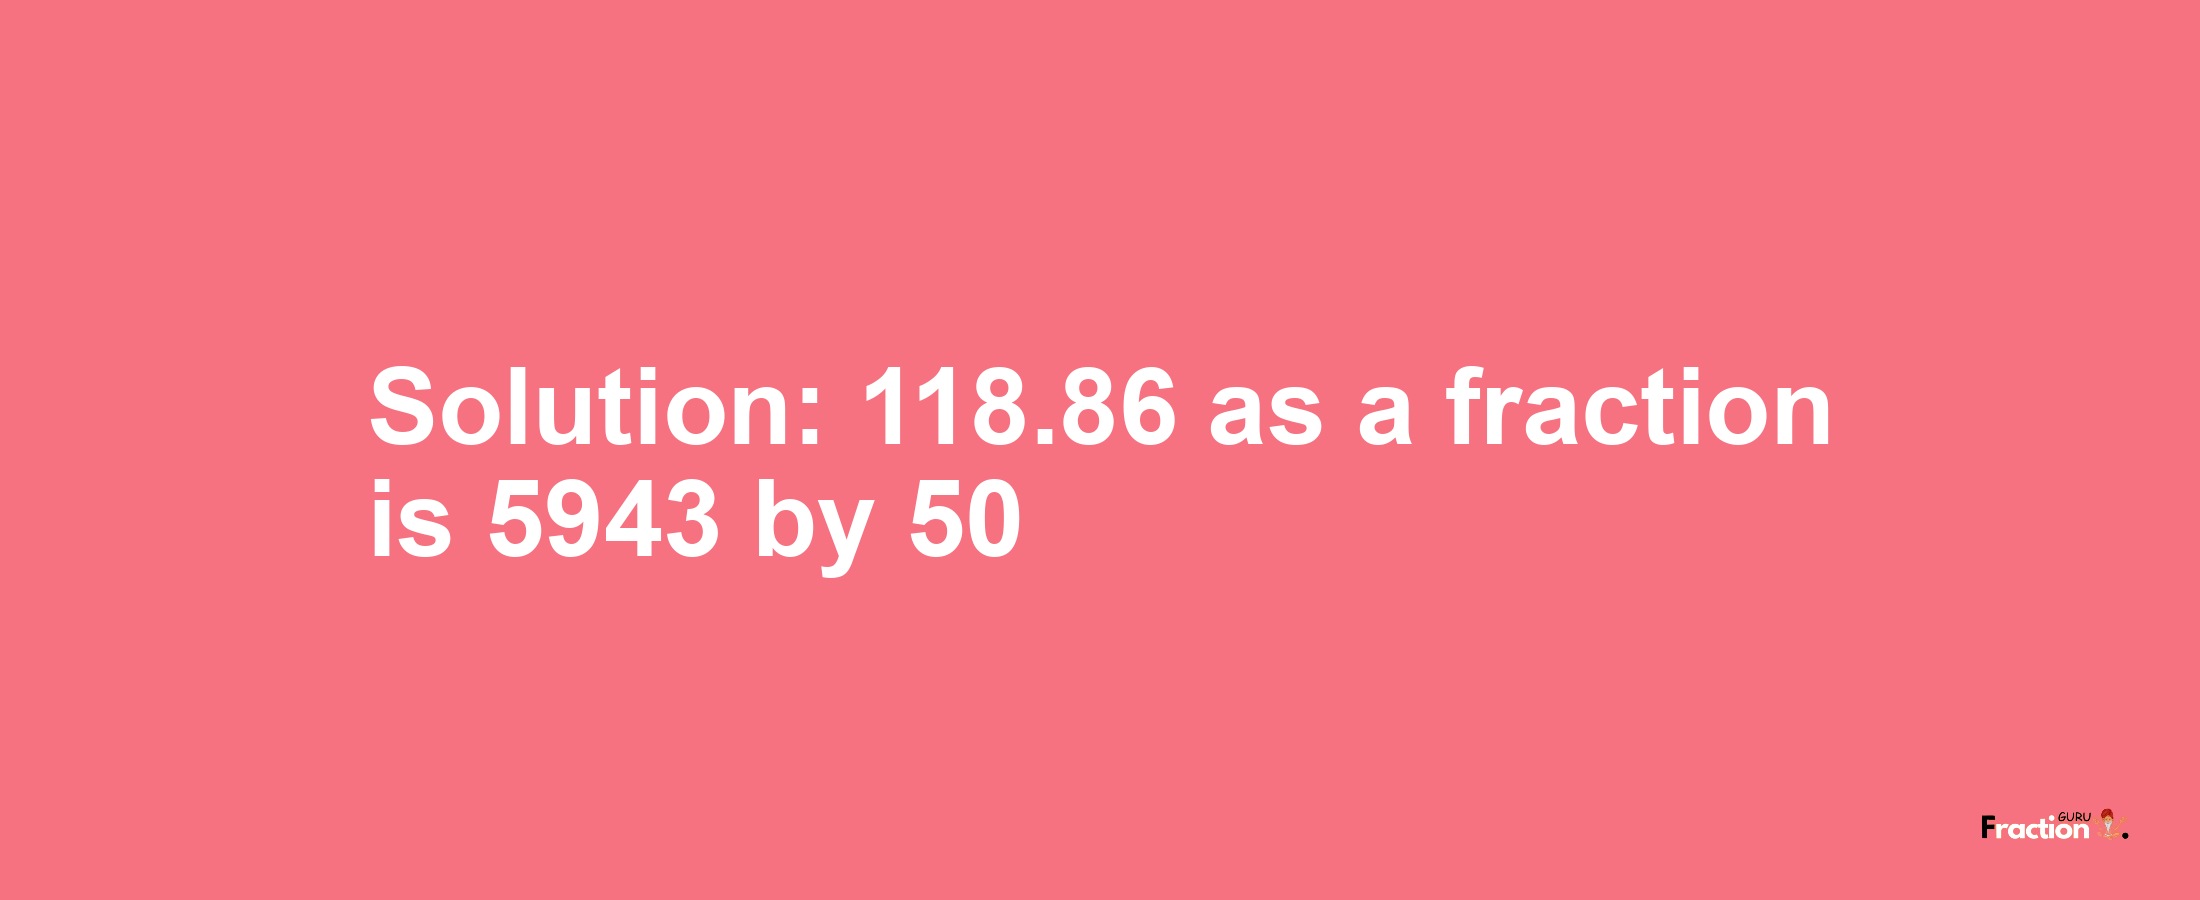 Solution:118.86 as a fraction is 5943/50